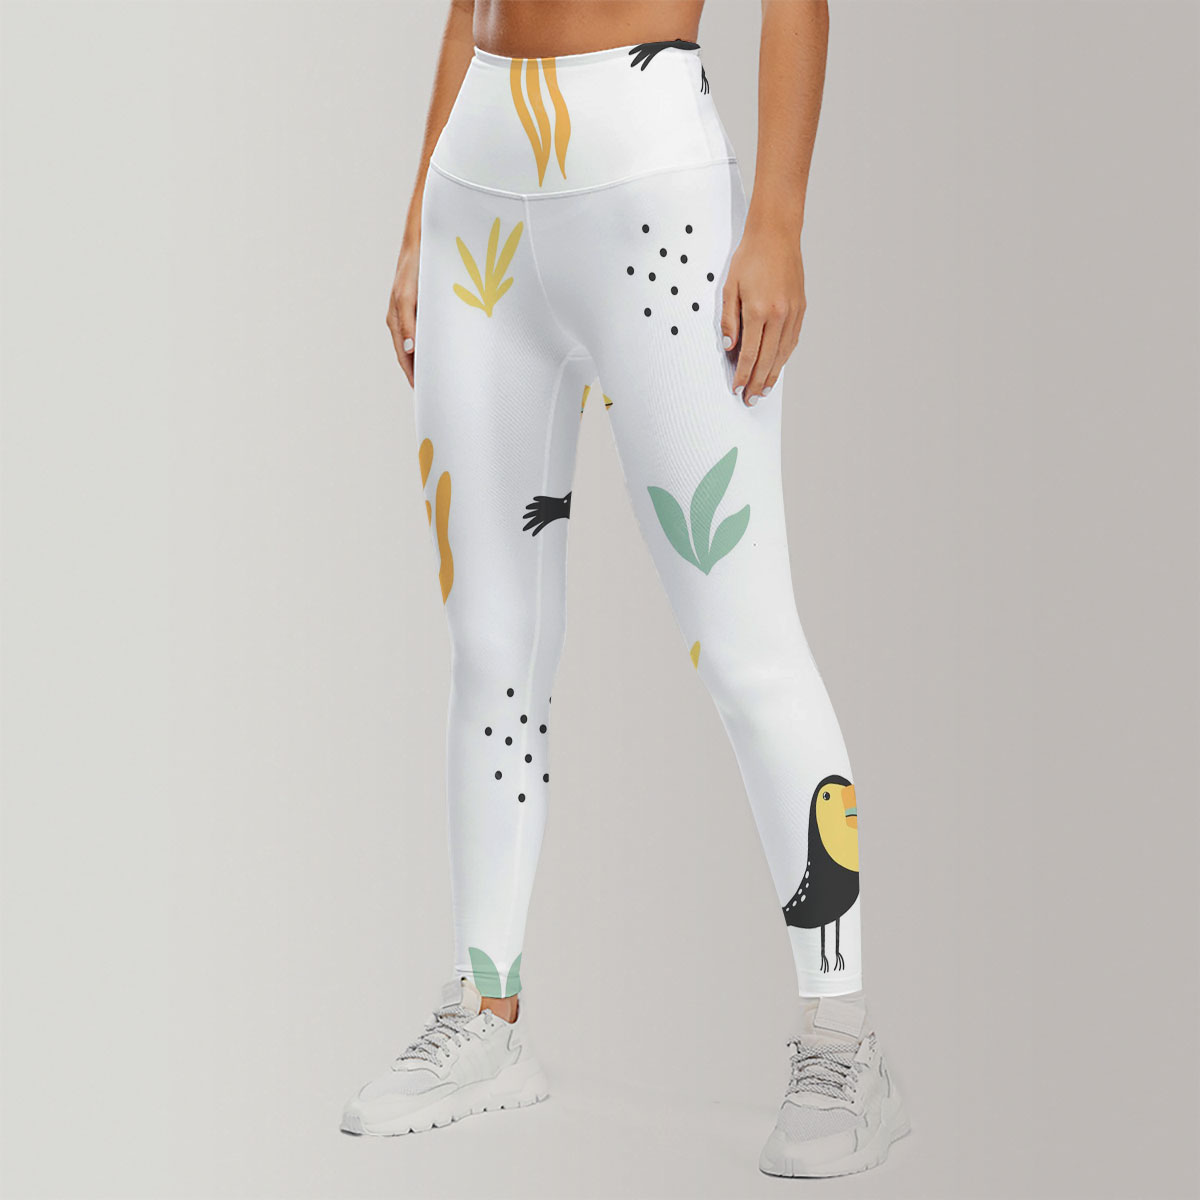 Funny Coon Toucan Legging